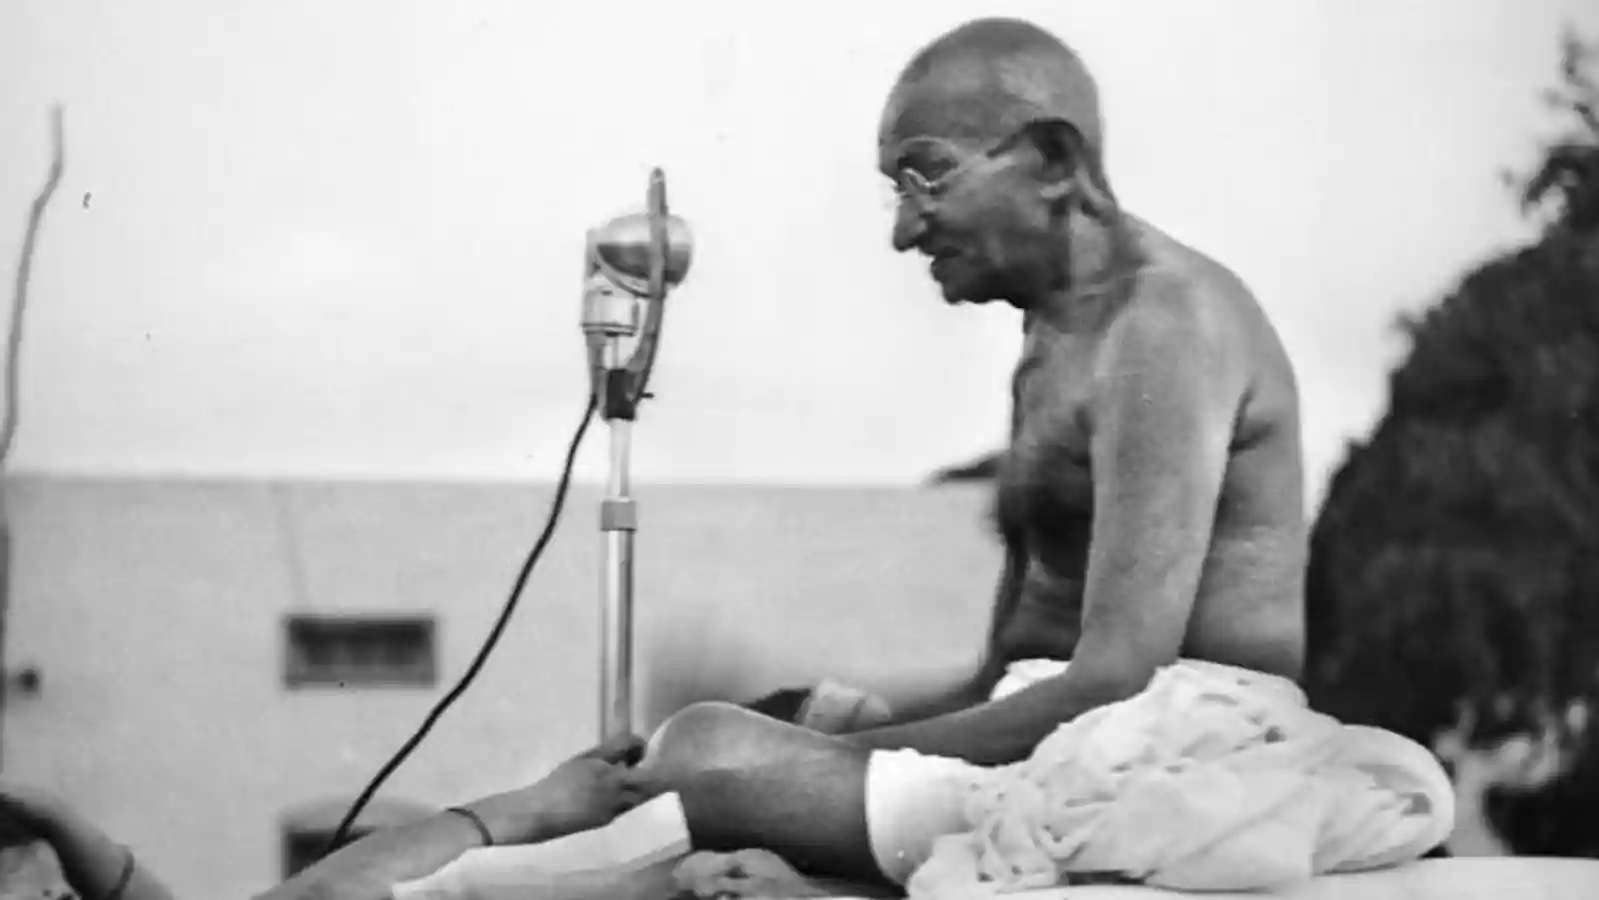 75 years after gandhi's assassination